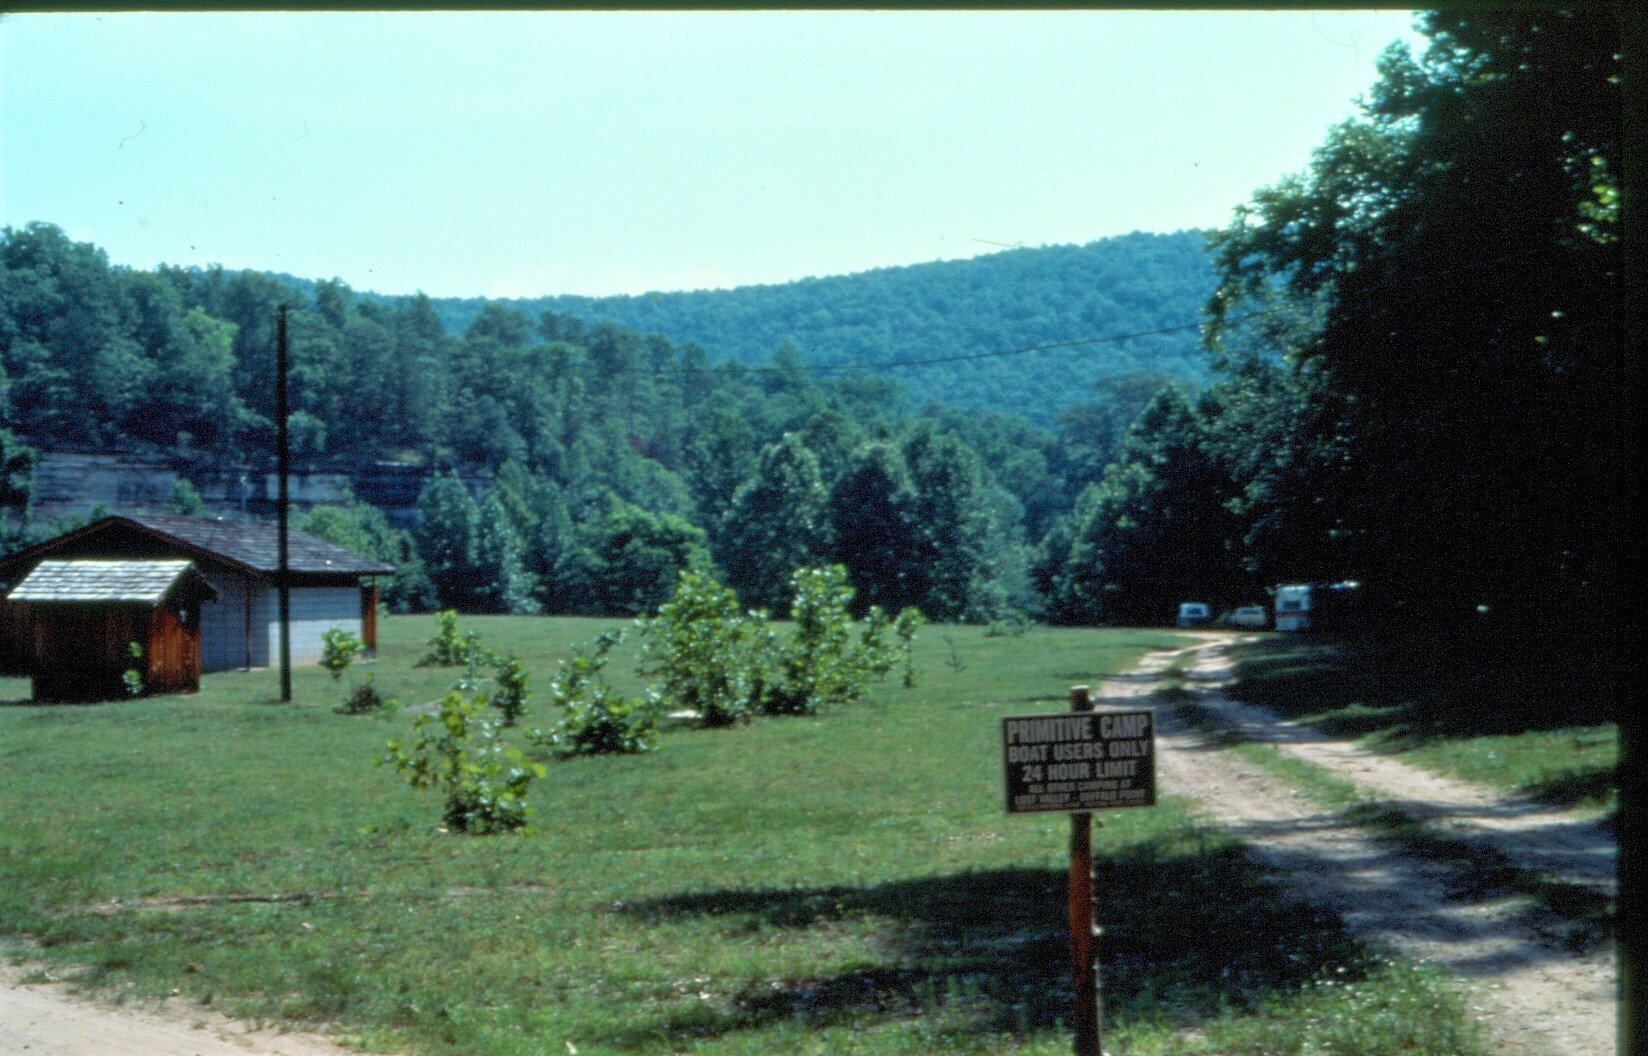 color photo with road at right, field at center and trees in background.